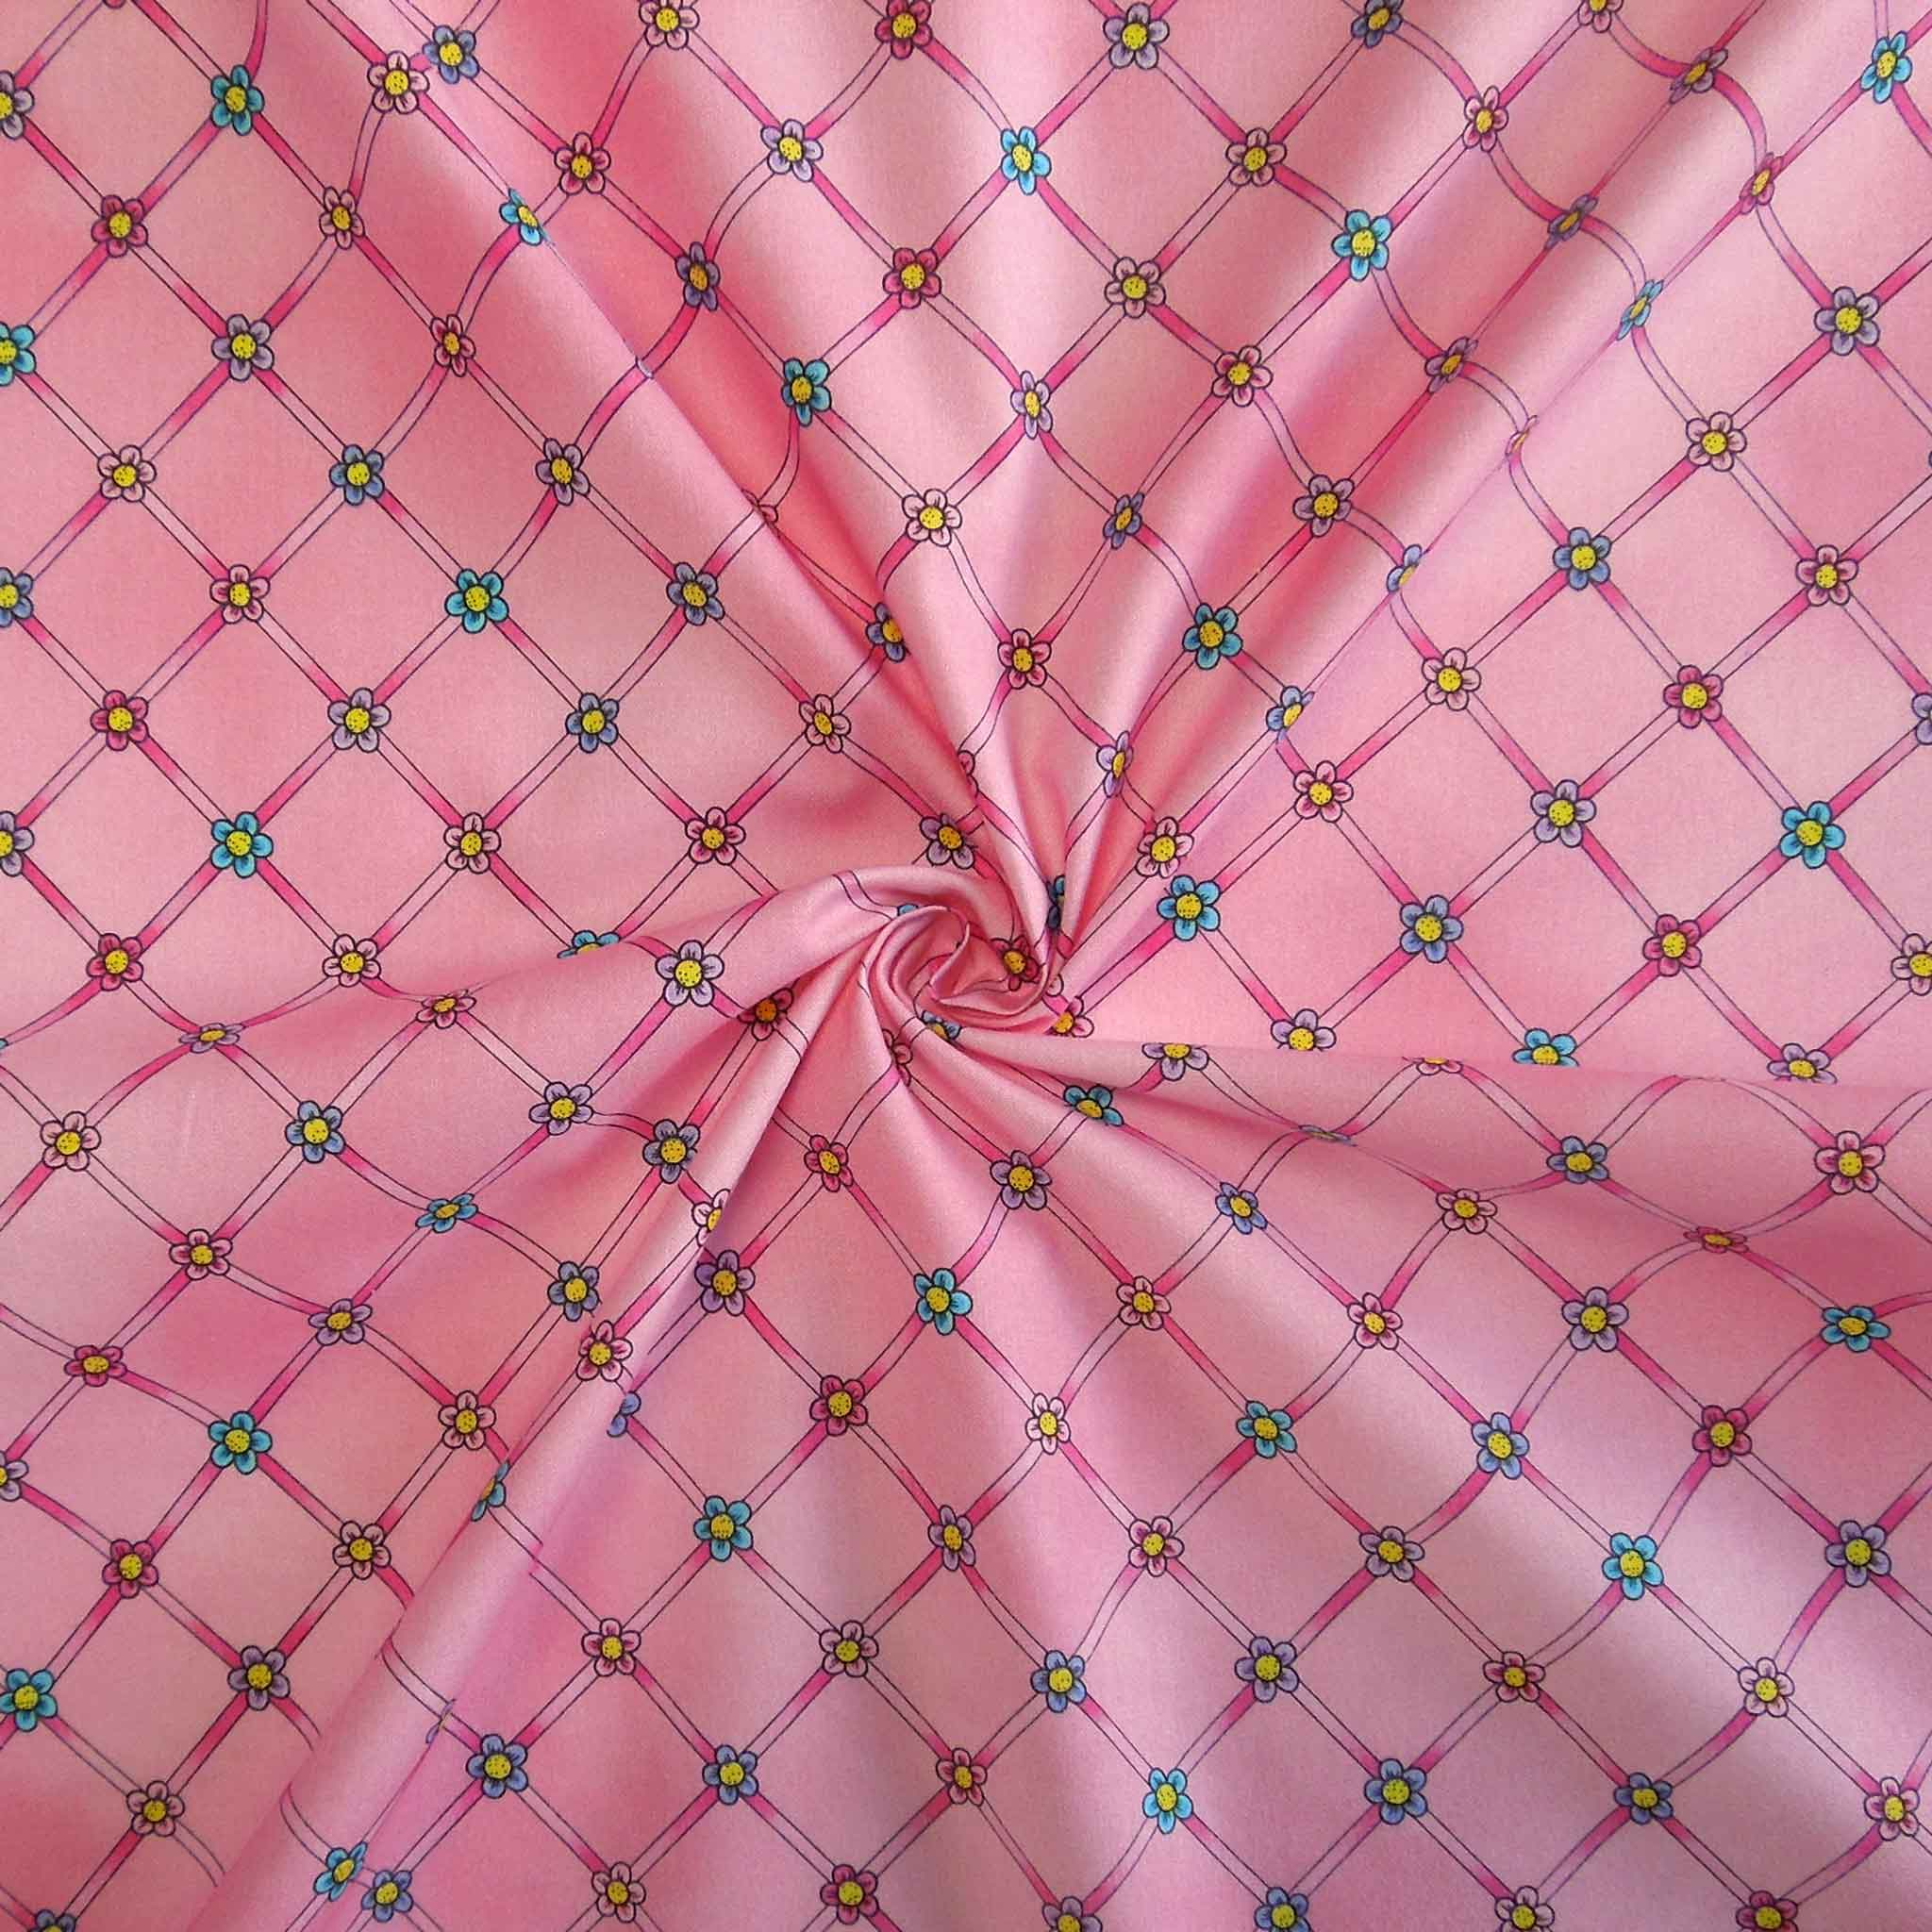 Pink Flower Trellis Cotton Fabric Timeless Treasures 2091/P - At The Ballet